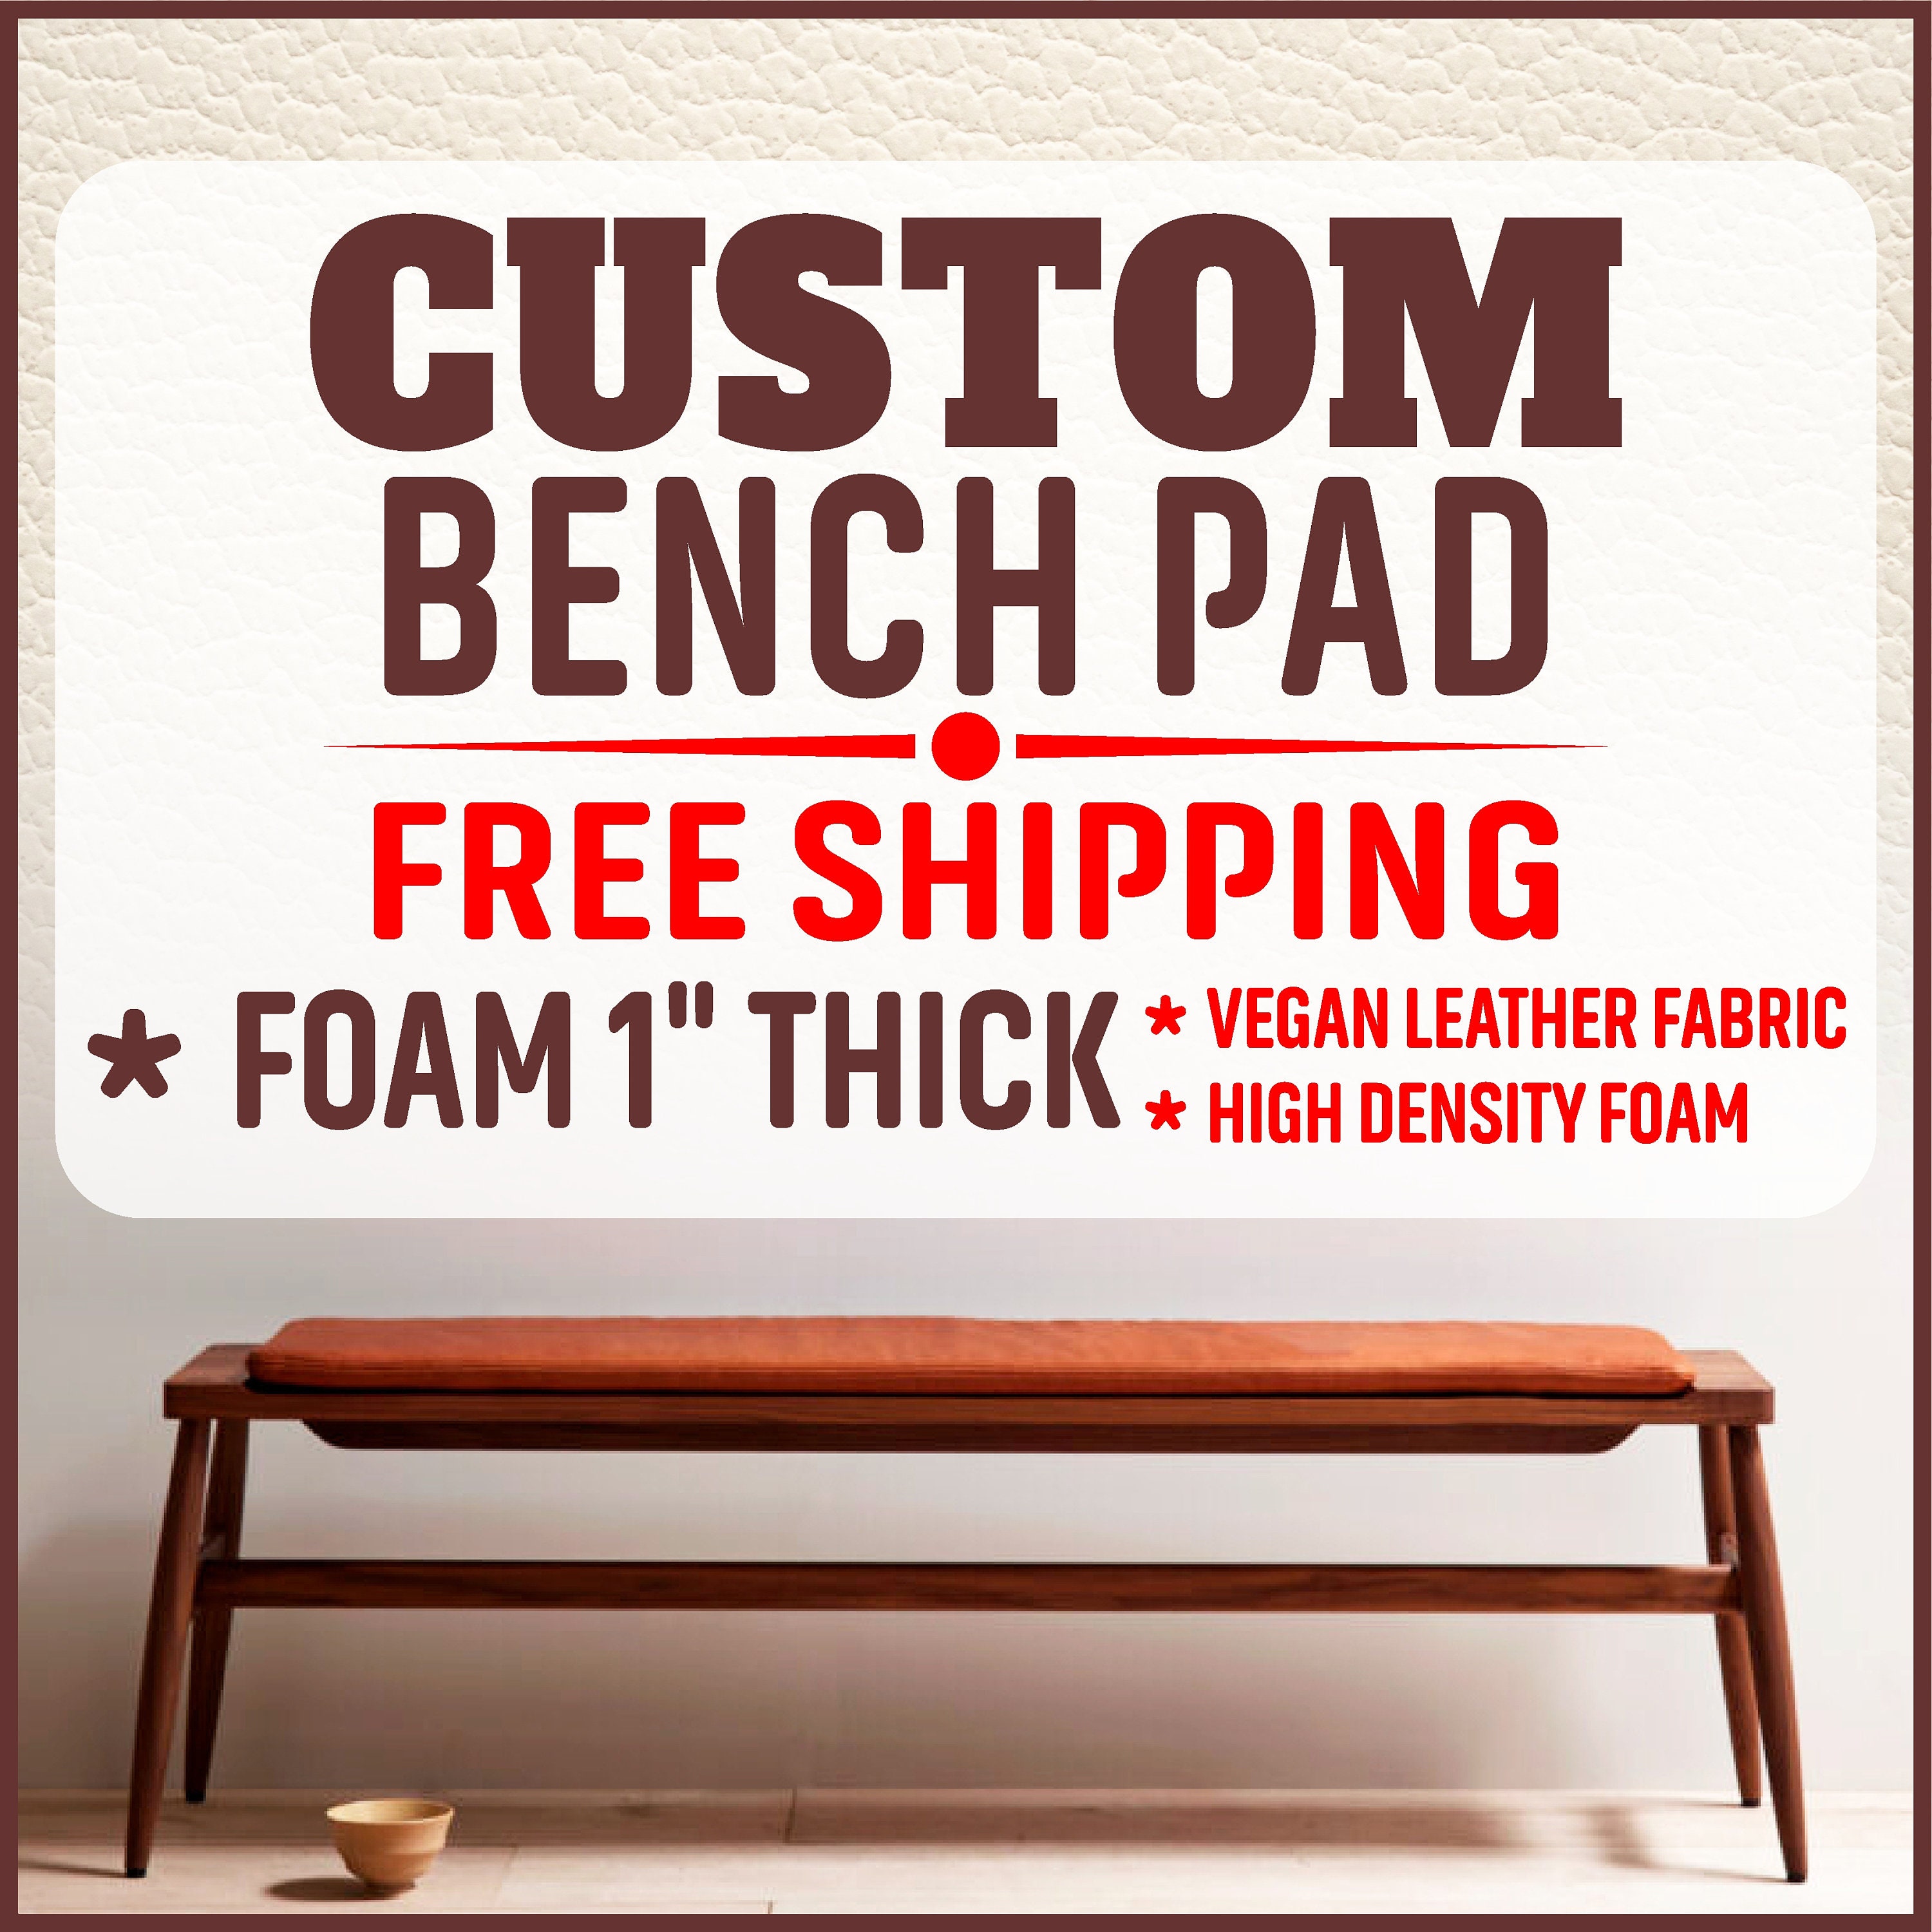 1 Thick Custom Bench PAD With Vegan Leather Fabric 